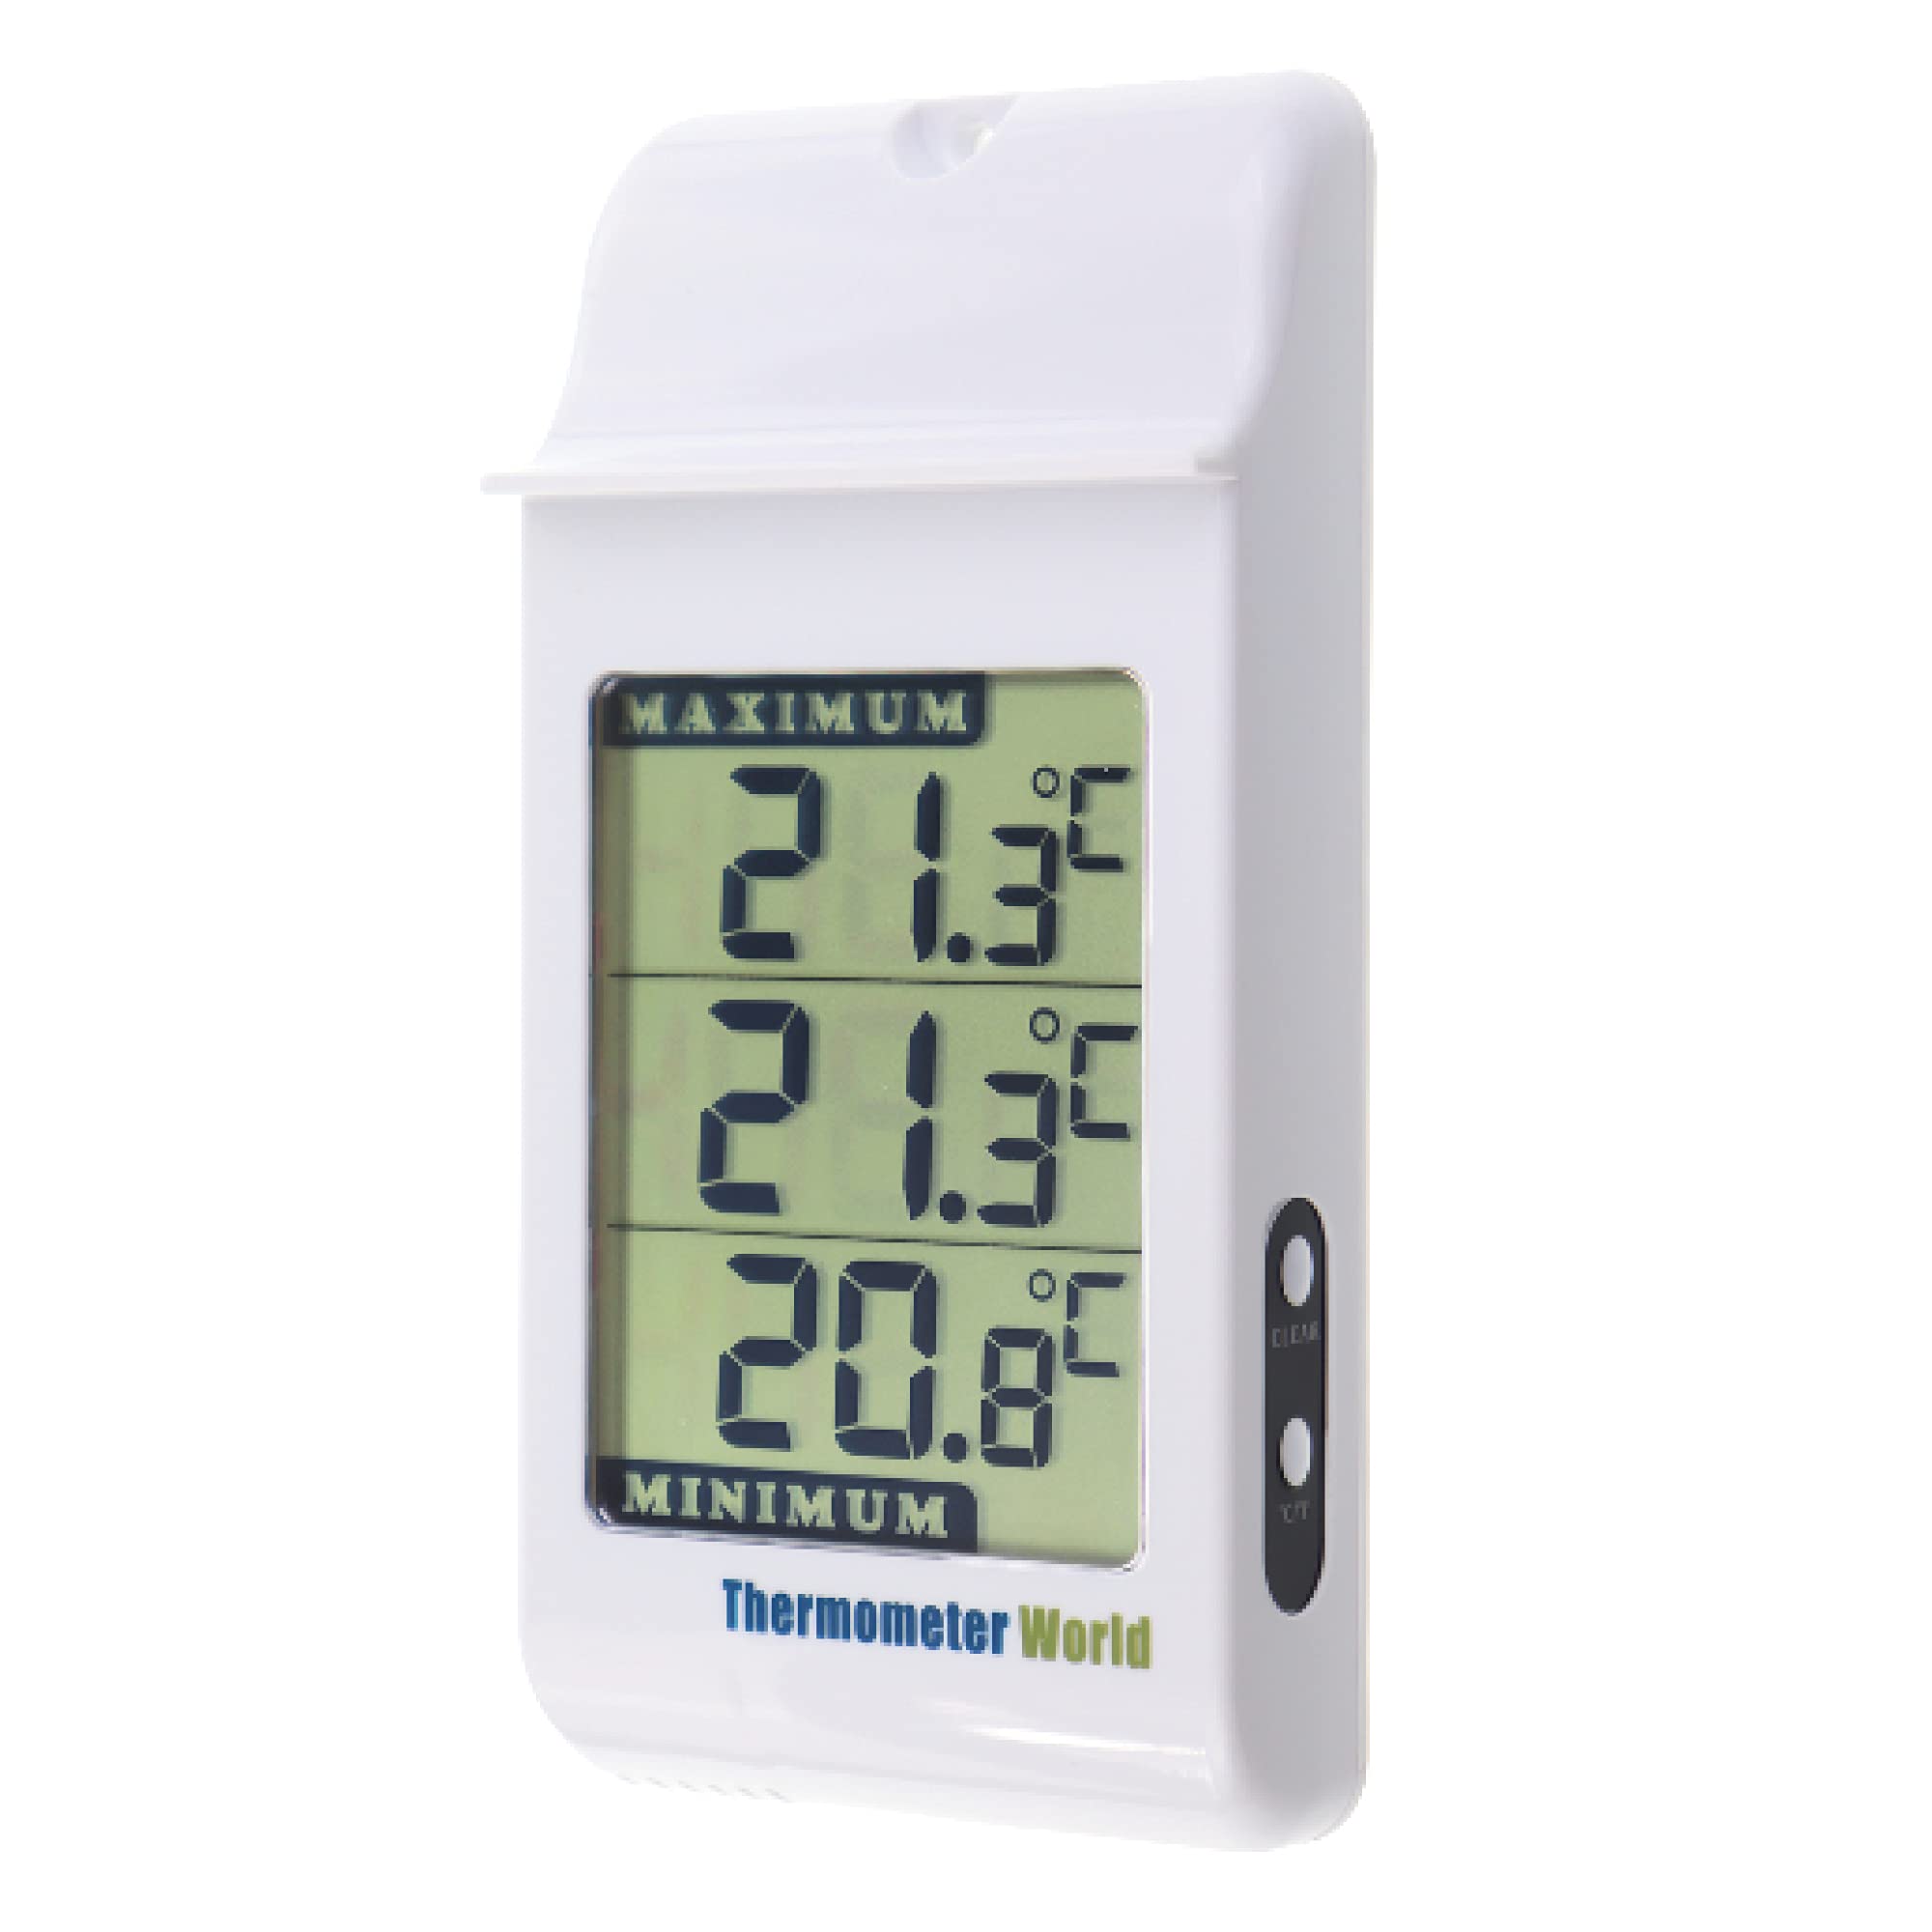 Digital Greenhouse Thermometer for Monitoring Maximum and Minimum Temperatures - High Low Thermometer for Recording Max and Min Temperatures Garage Greenhouse Accessories Indoor Outdoor